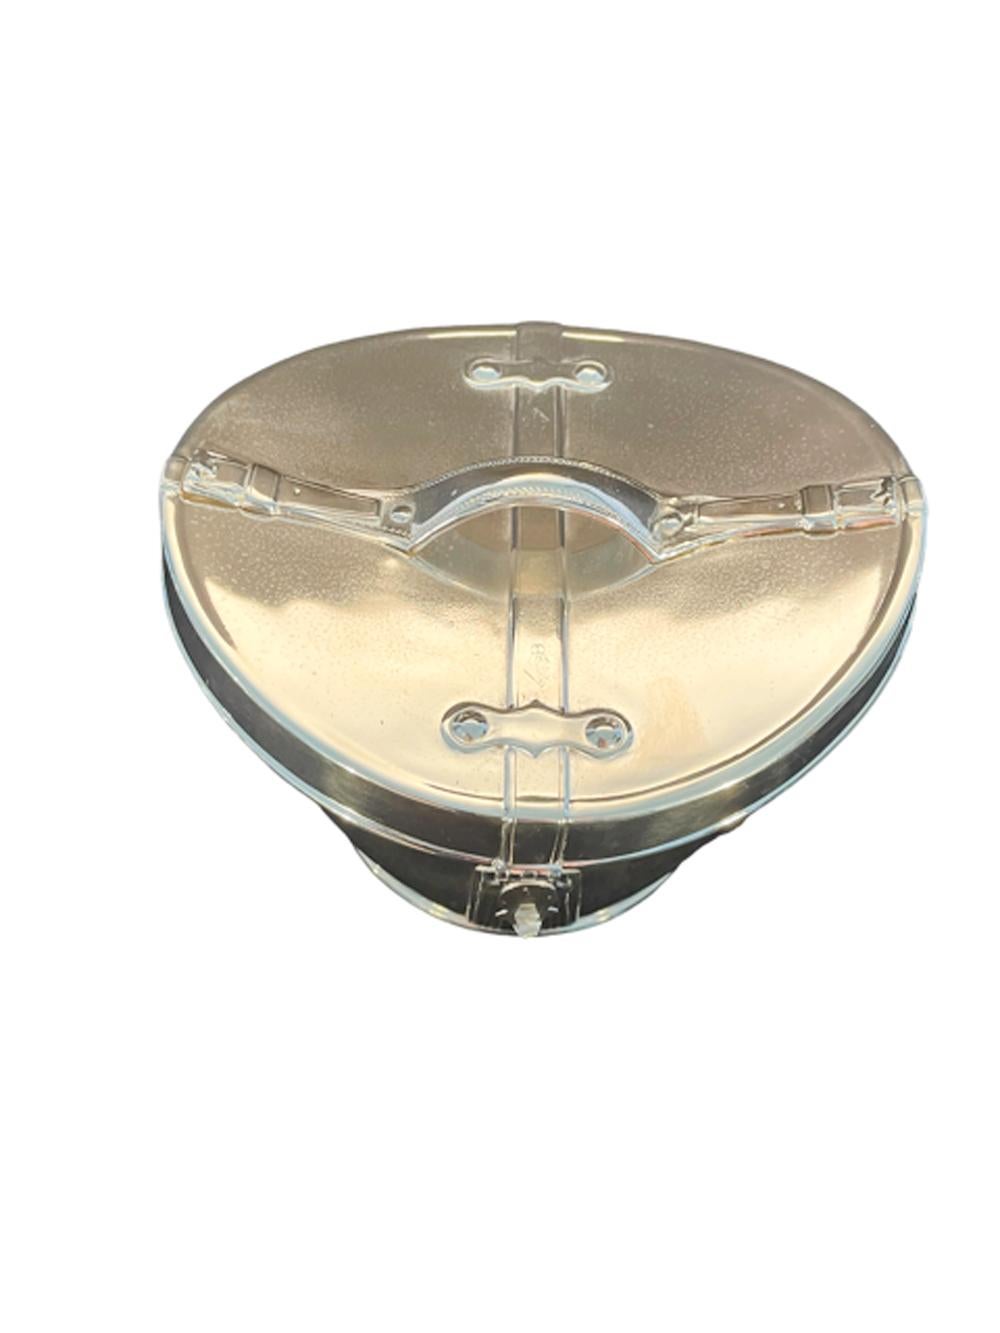 Art Deco Silver Plate Novelty Biscuit Box in the Form of a Victorian Top Hat Box For Sale 2